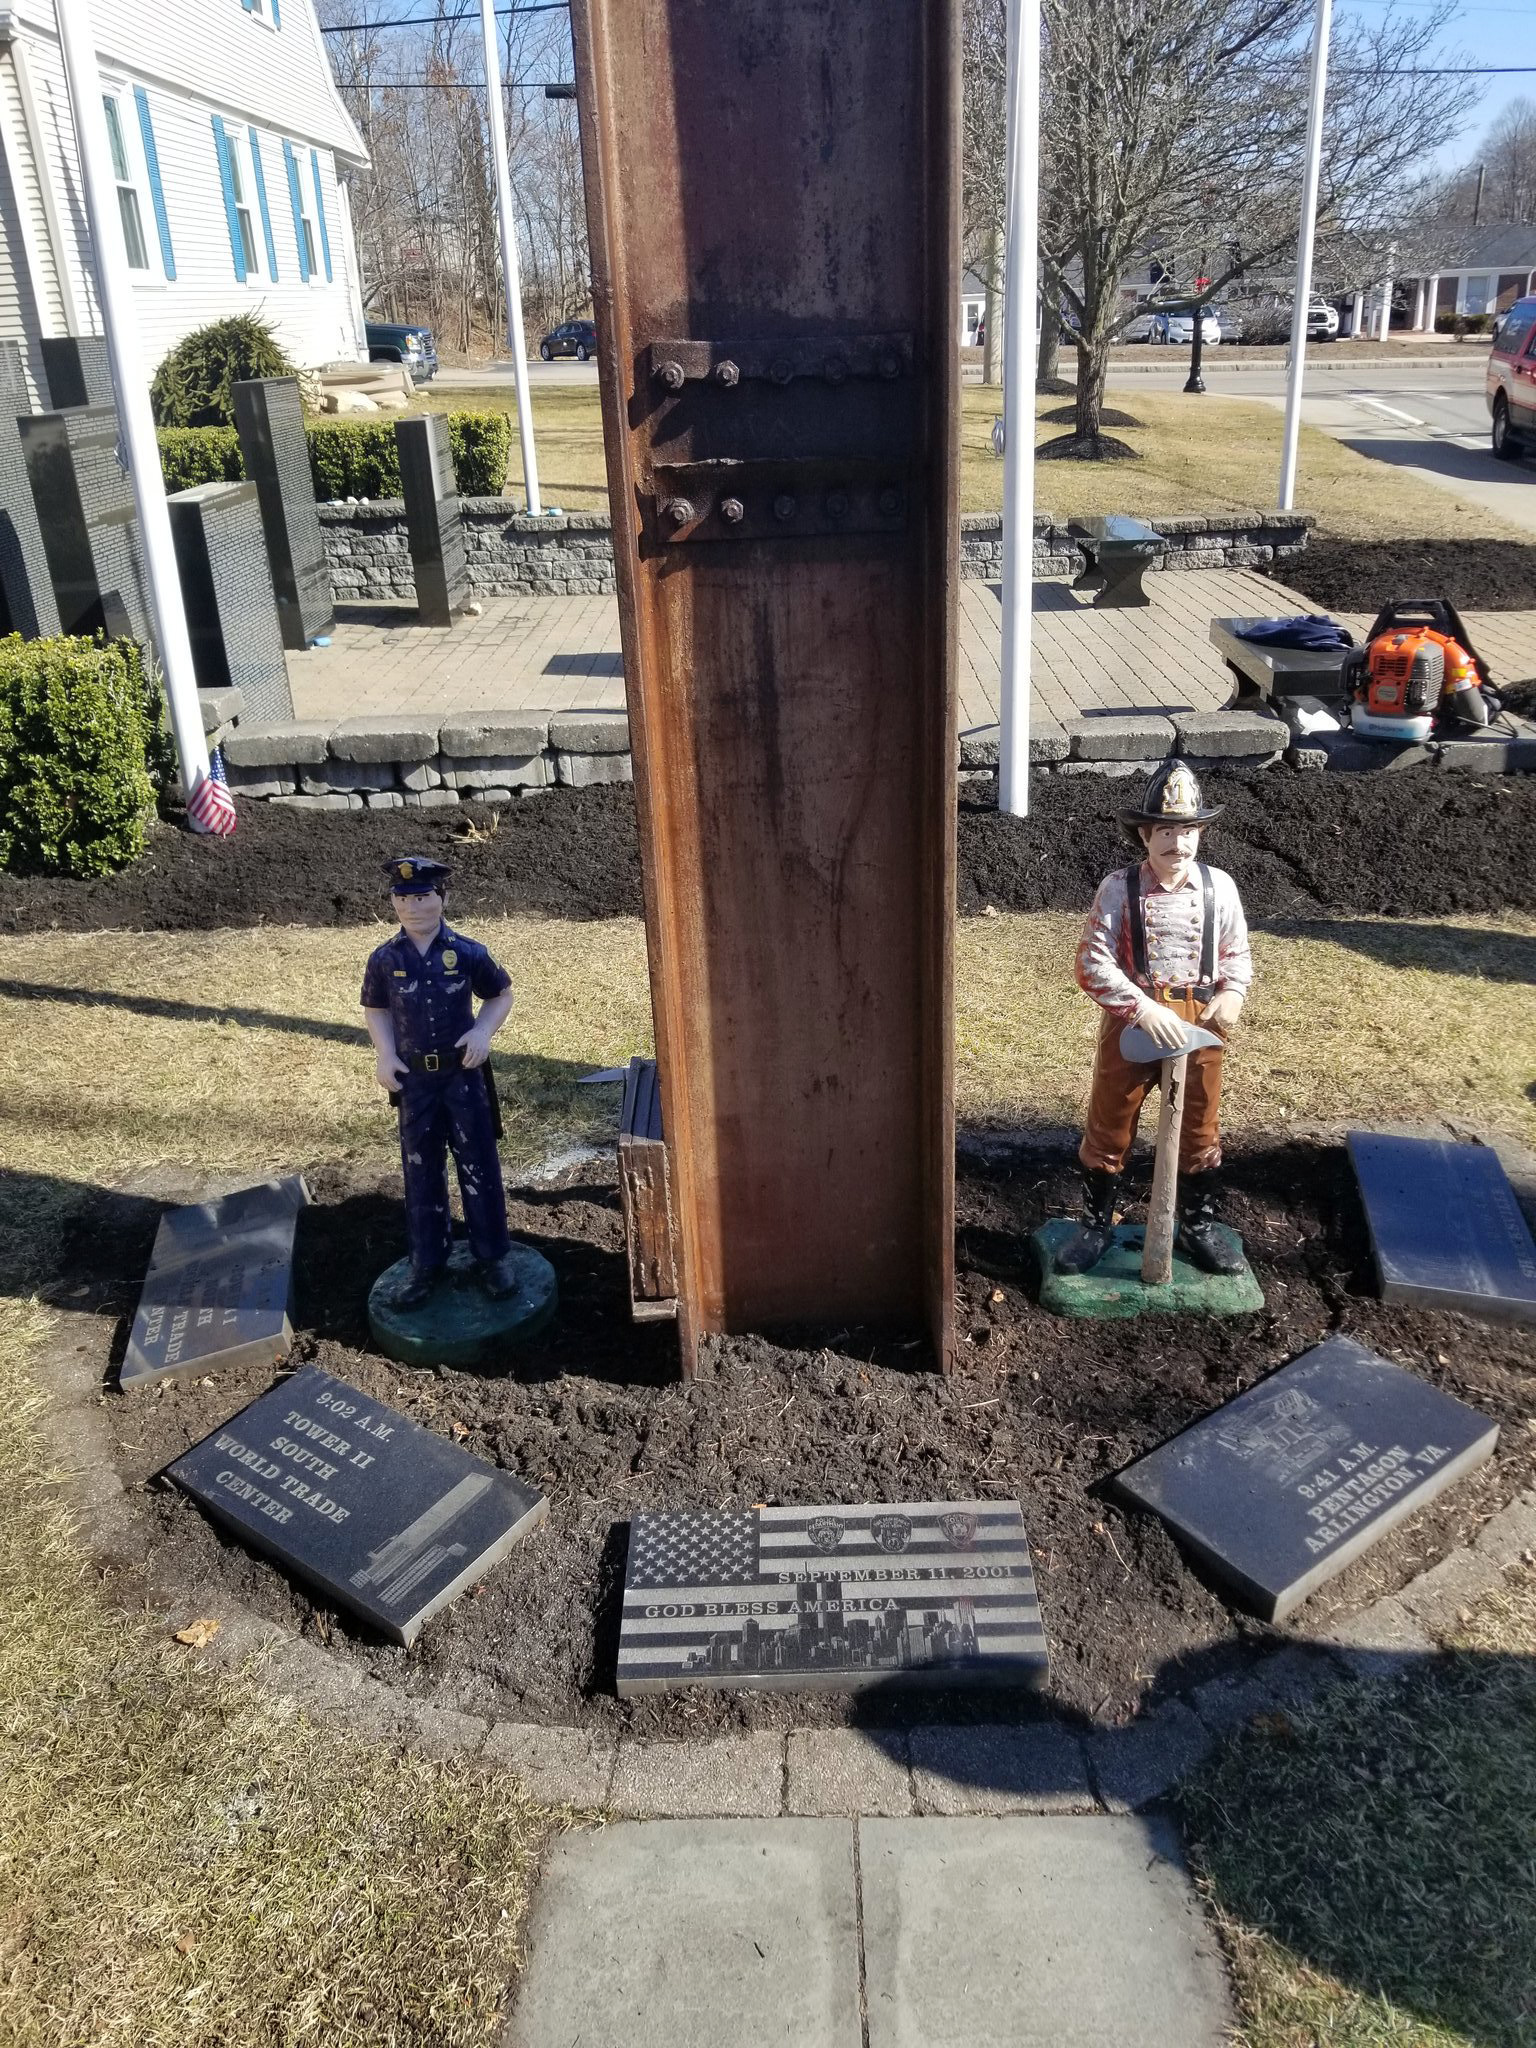 PHOTO: Firefighters repair a 9/11 memorial in Plymouth, Mass. after it was vandalized, Feb. 24, 2020.